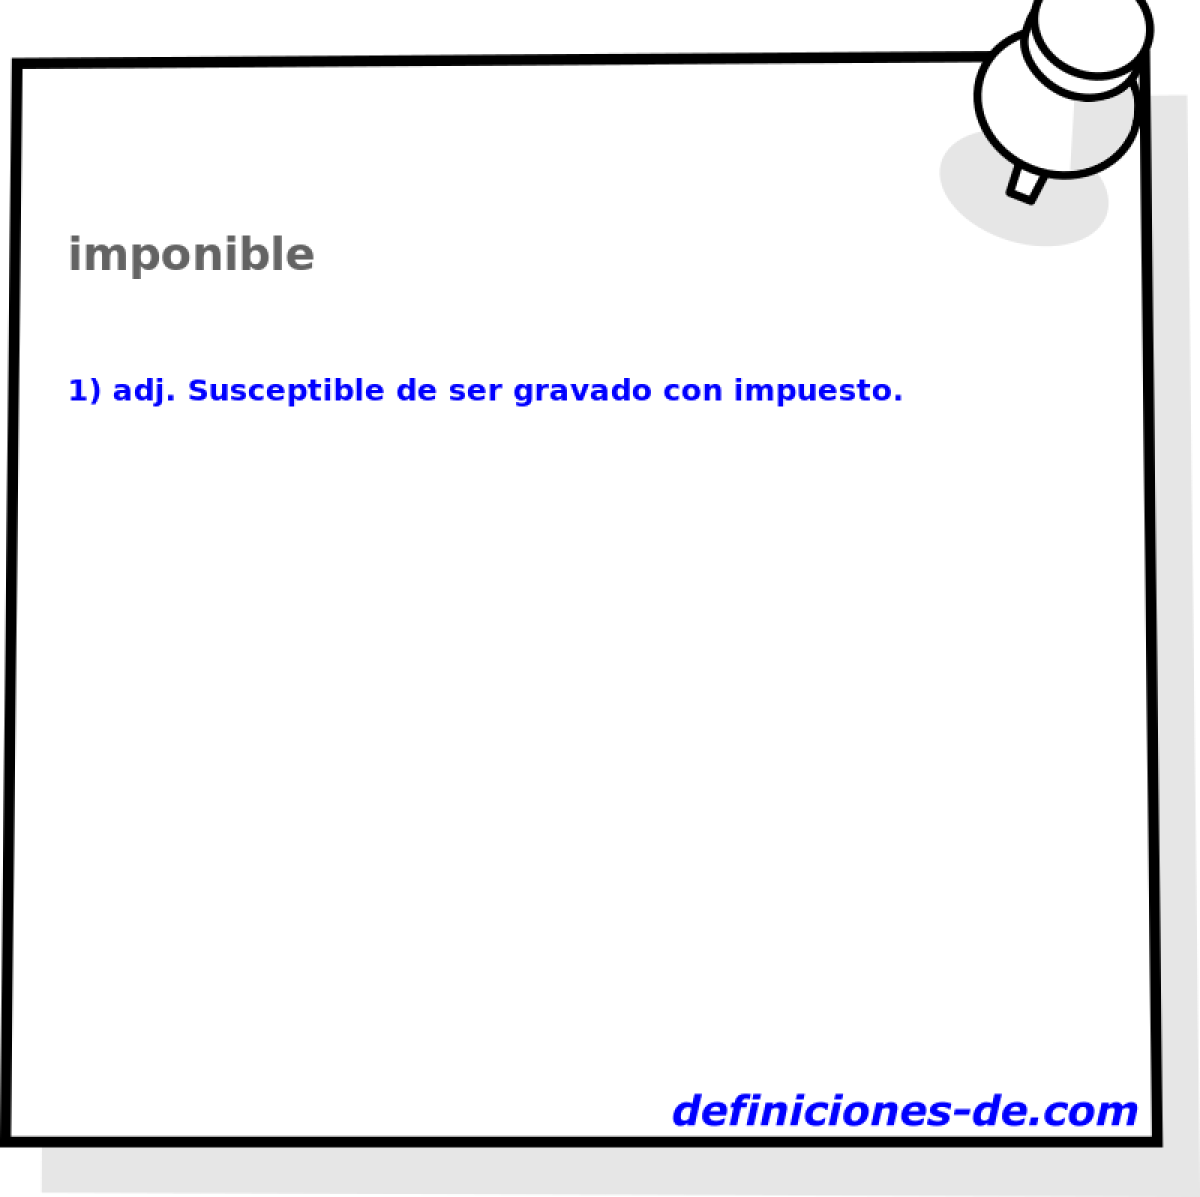 imponible 